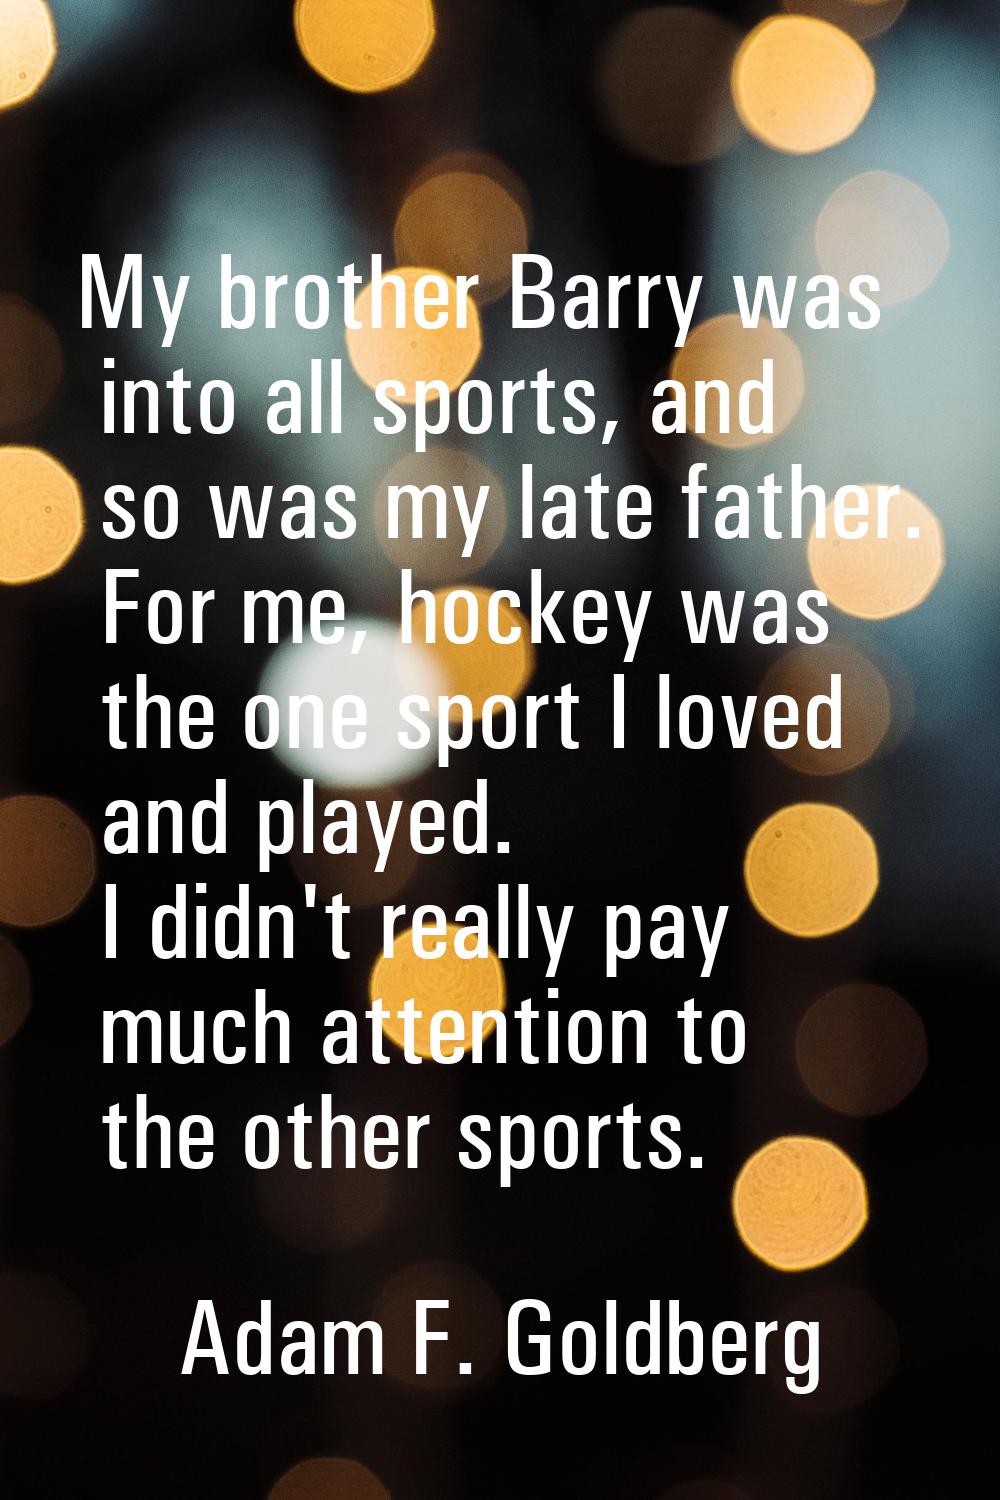 My brother Barry was into all sports, and so was my late father. For me, hockey was the one sport I